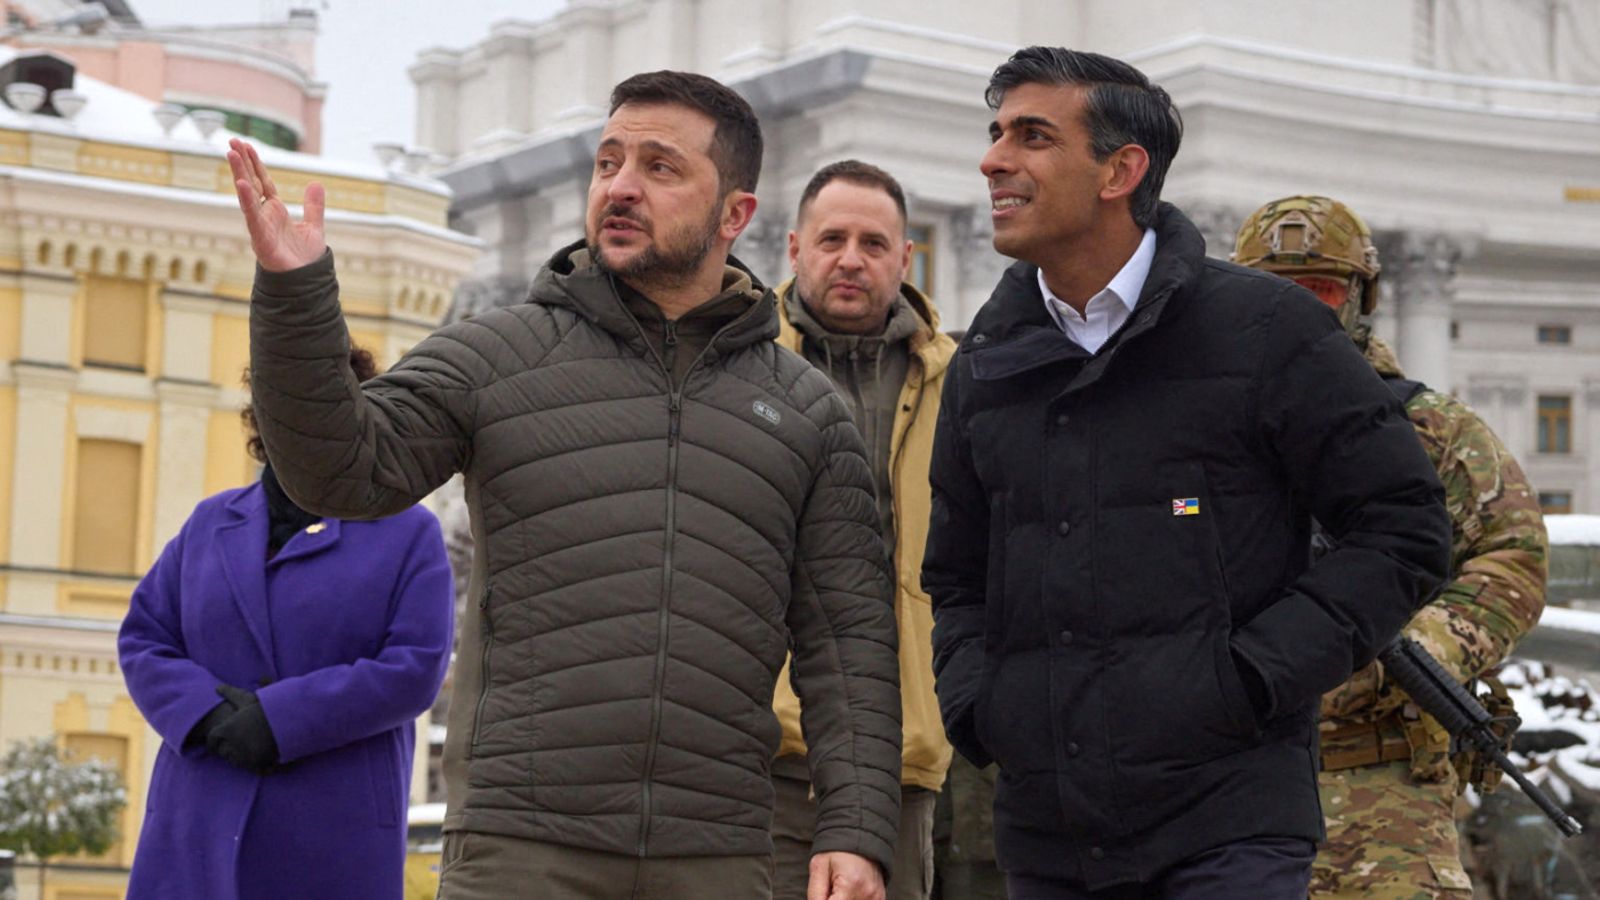 Ukrainian President Volodymyr Zelenskyy to arrive in UK today in first visit since Russian invasion